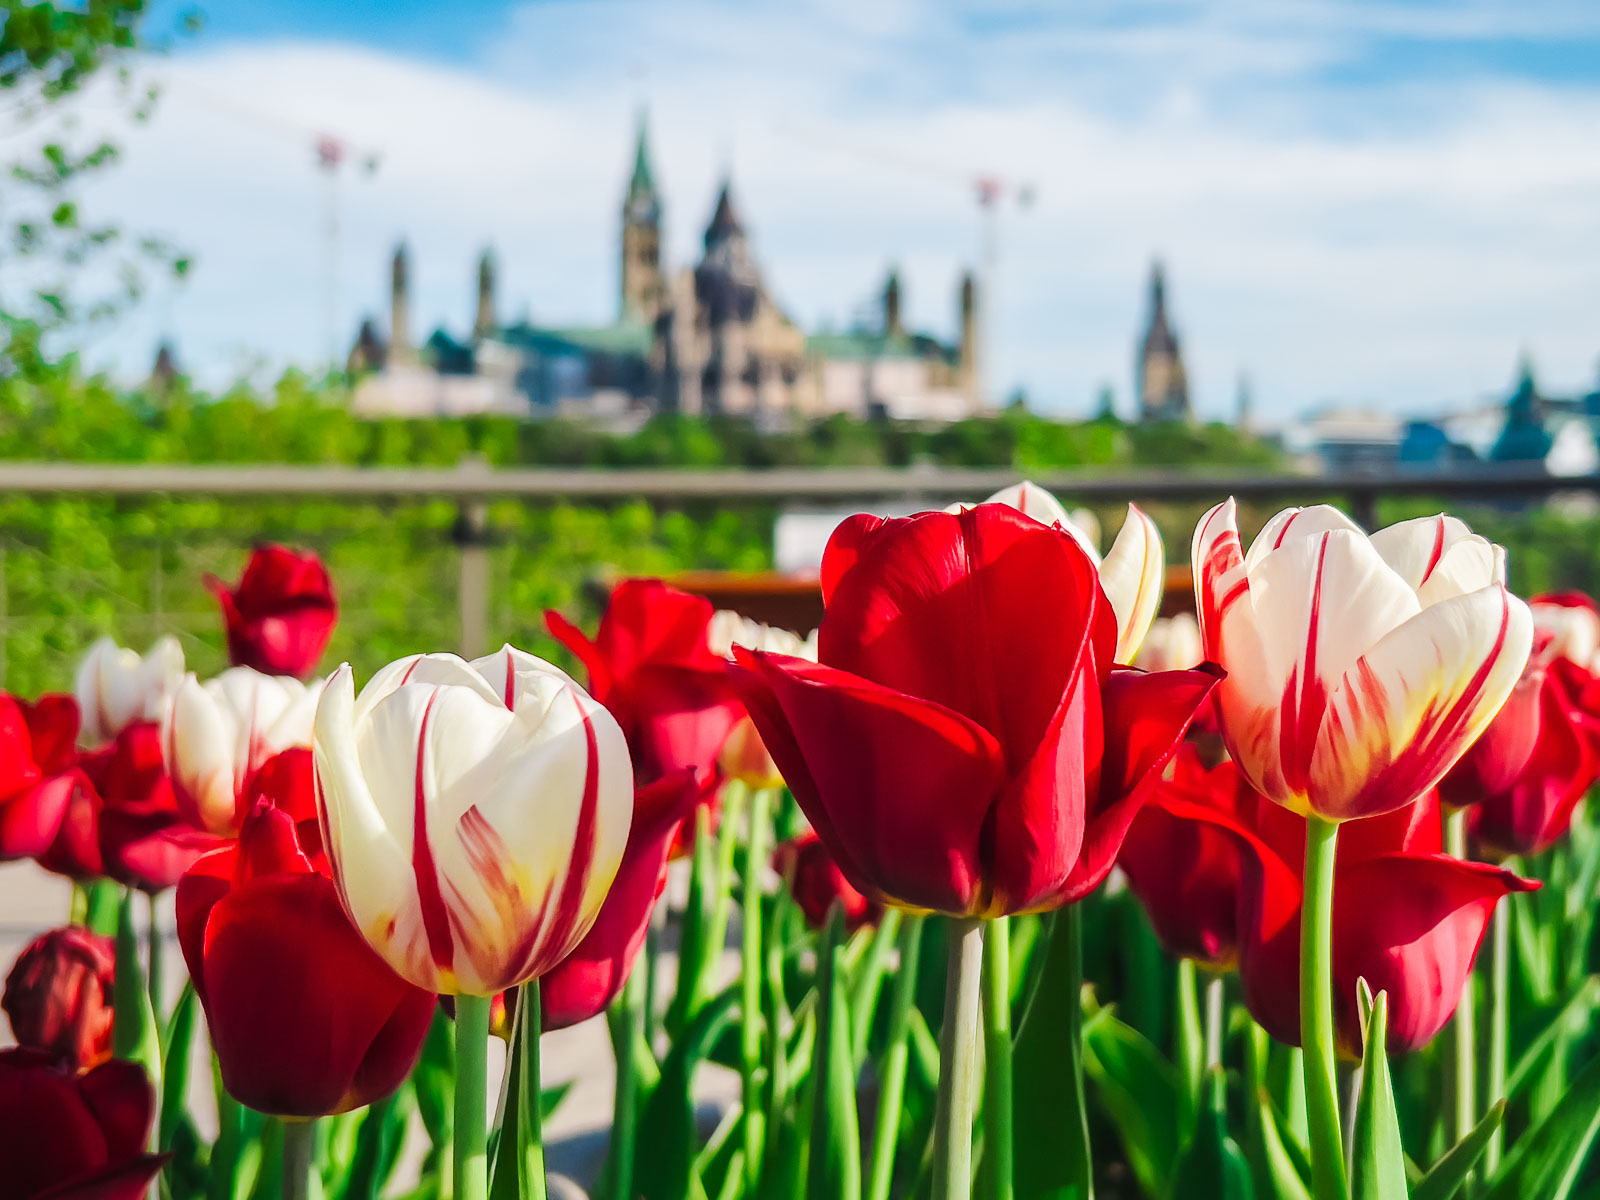 How to Visit the Ottawa Tulip Festival - The Best and Biggest